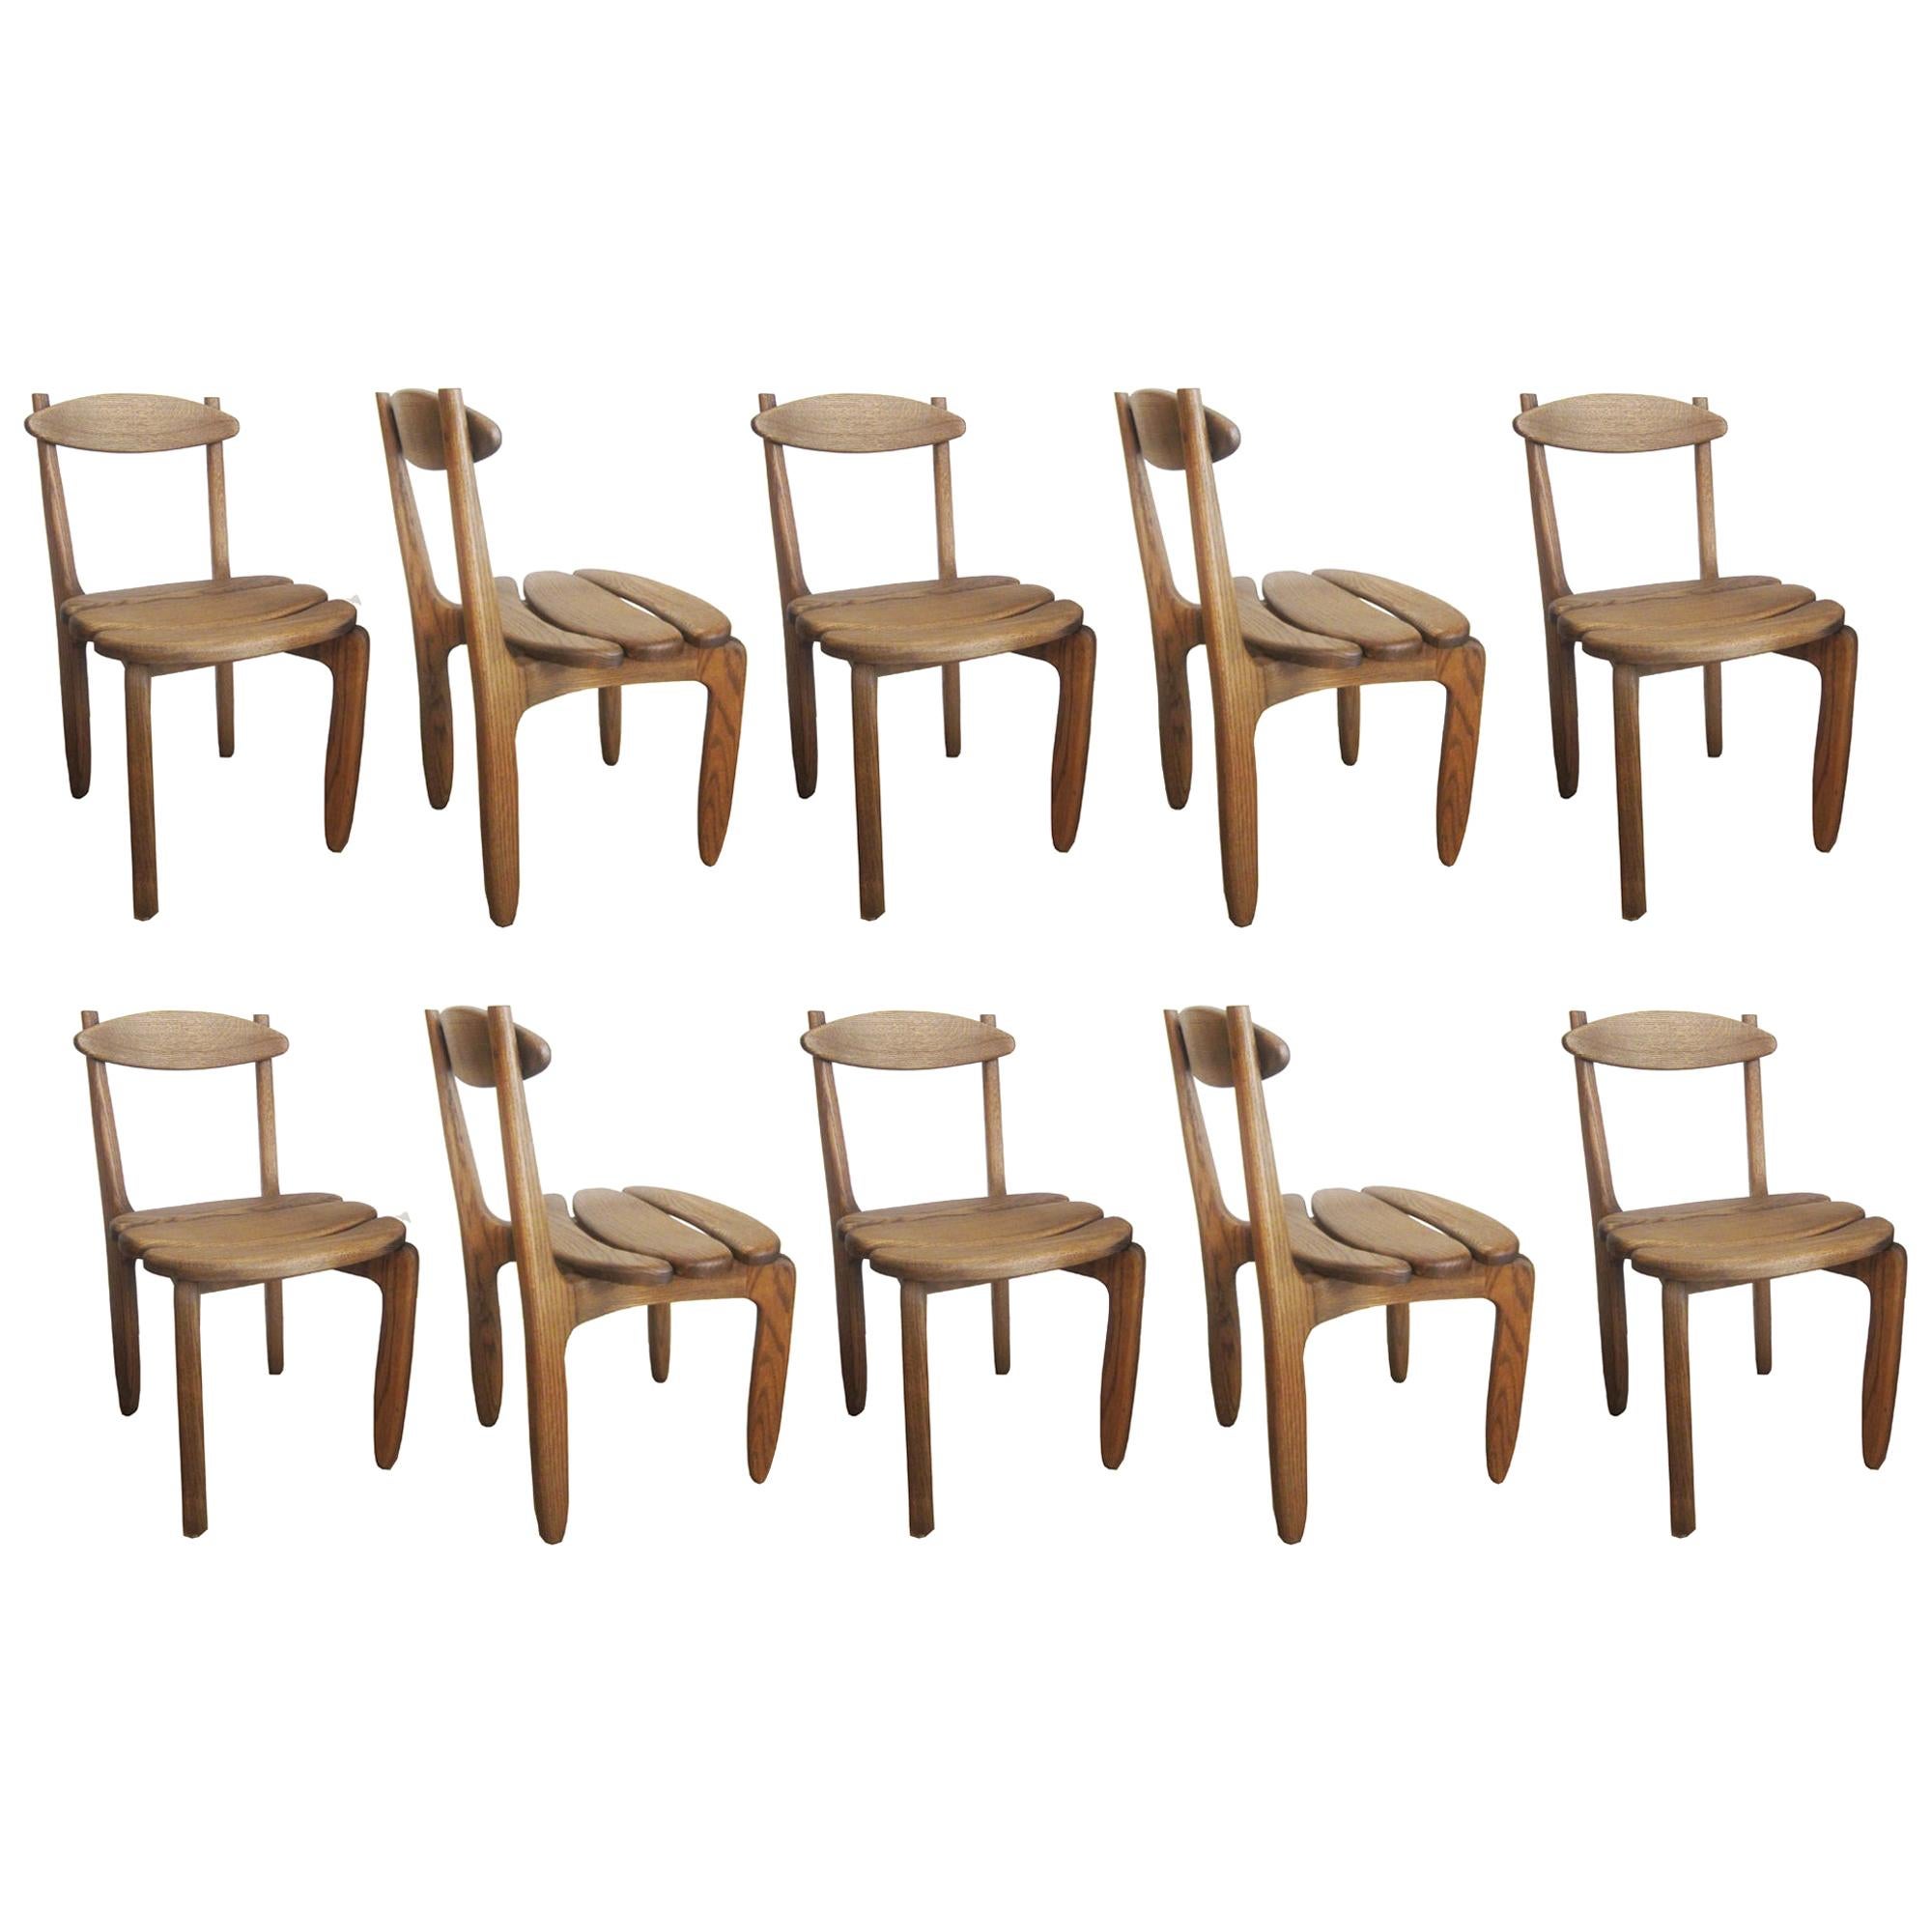 Set of Ten Solid Oak Dining Room Chairs by Guillerme et Chambron